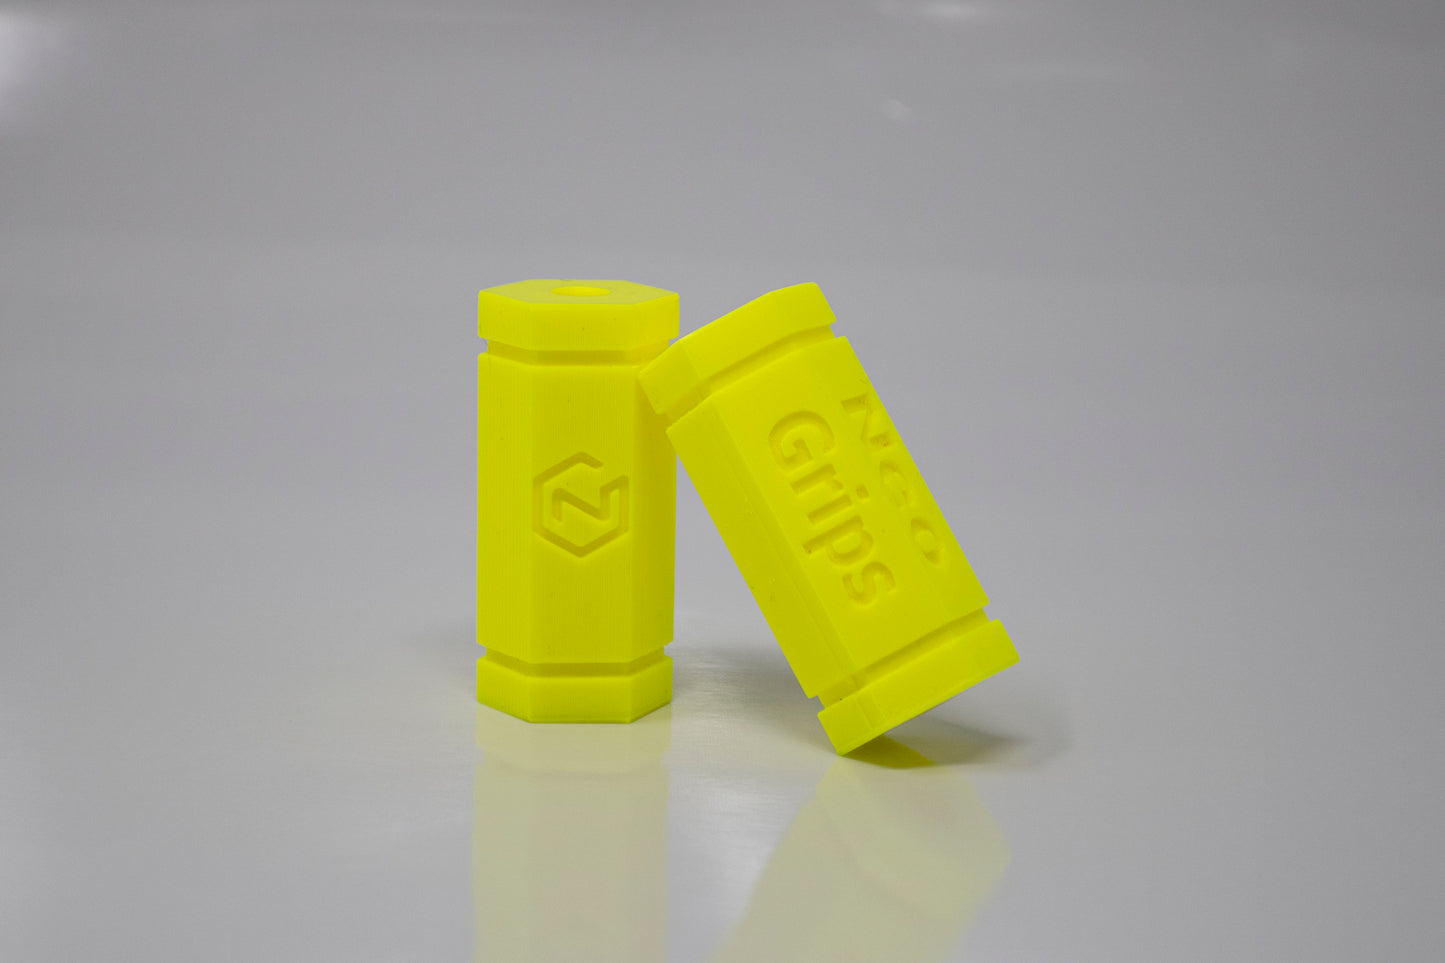 NeoGrips Slim Pencil Grips